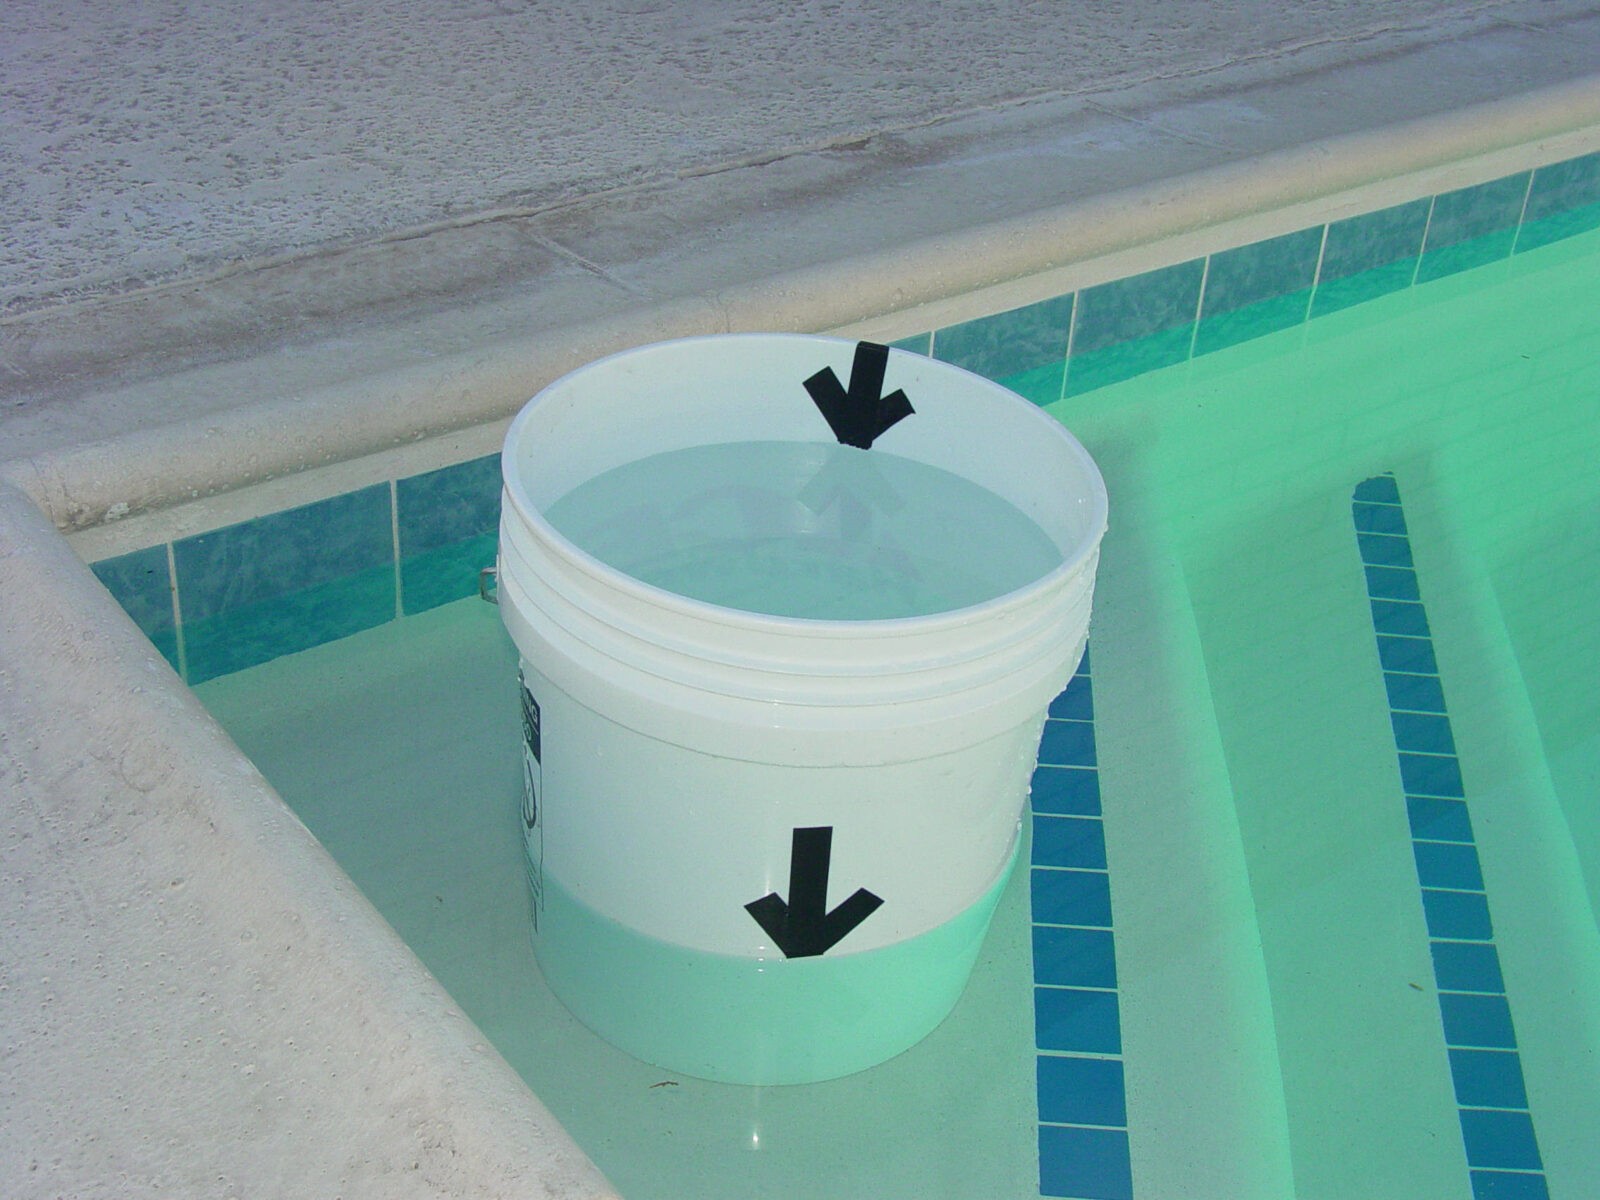 Pool Leak? Try the The Bucket Test